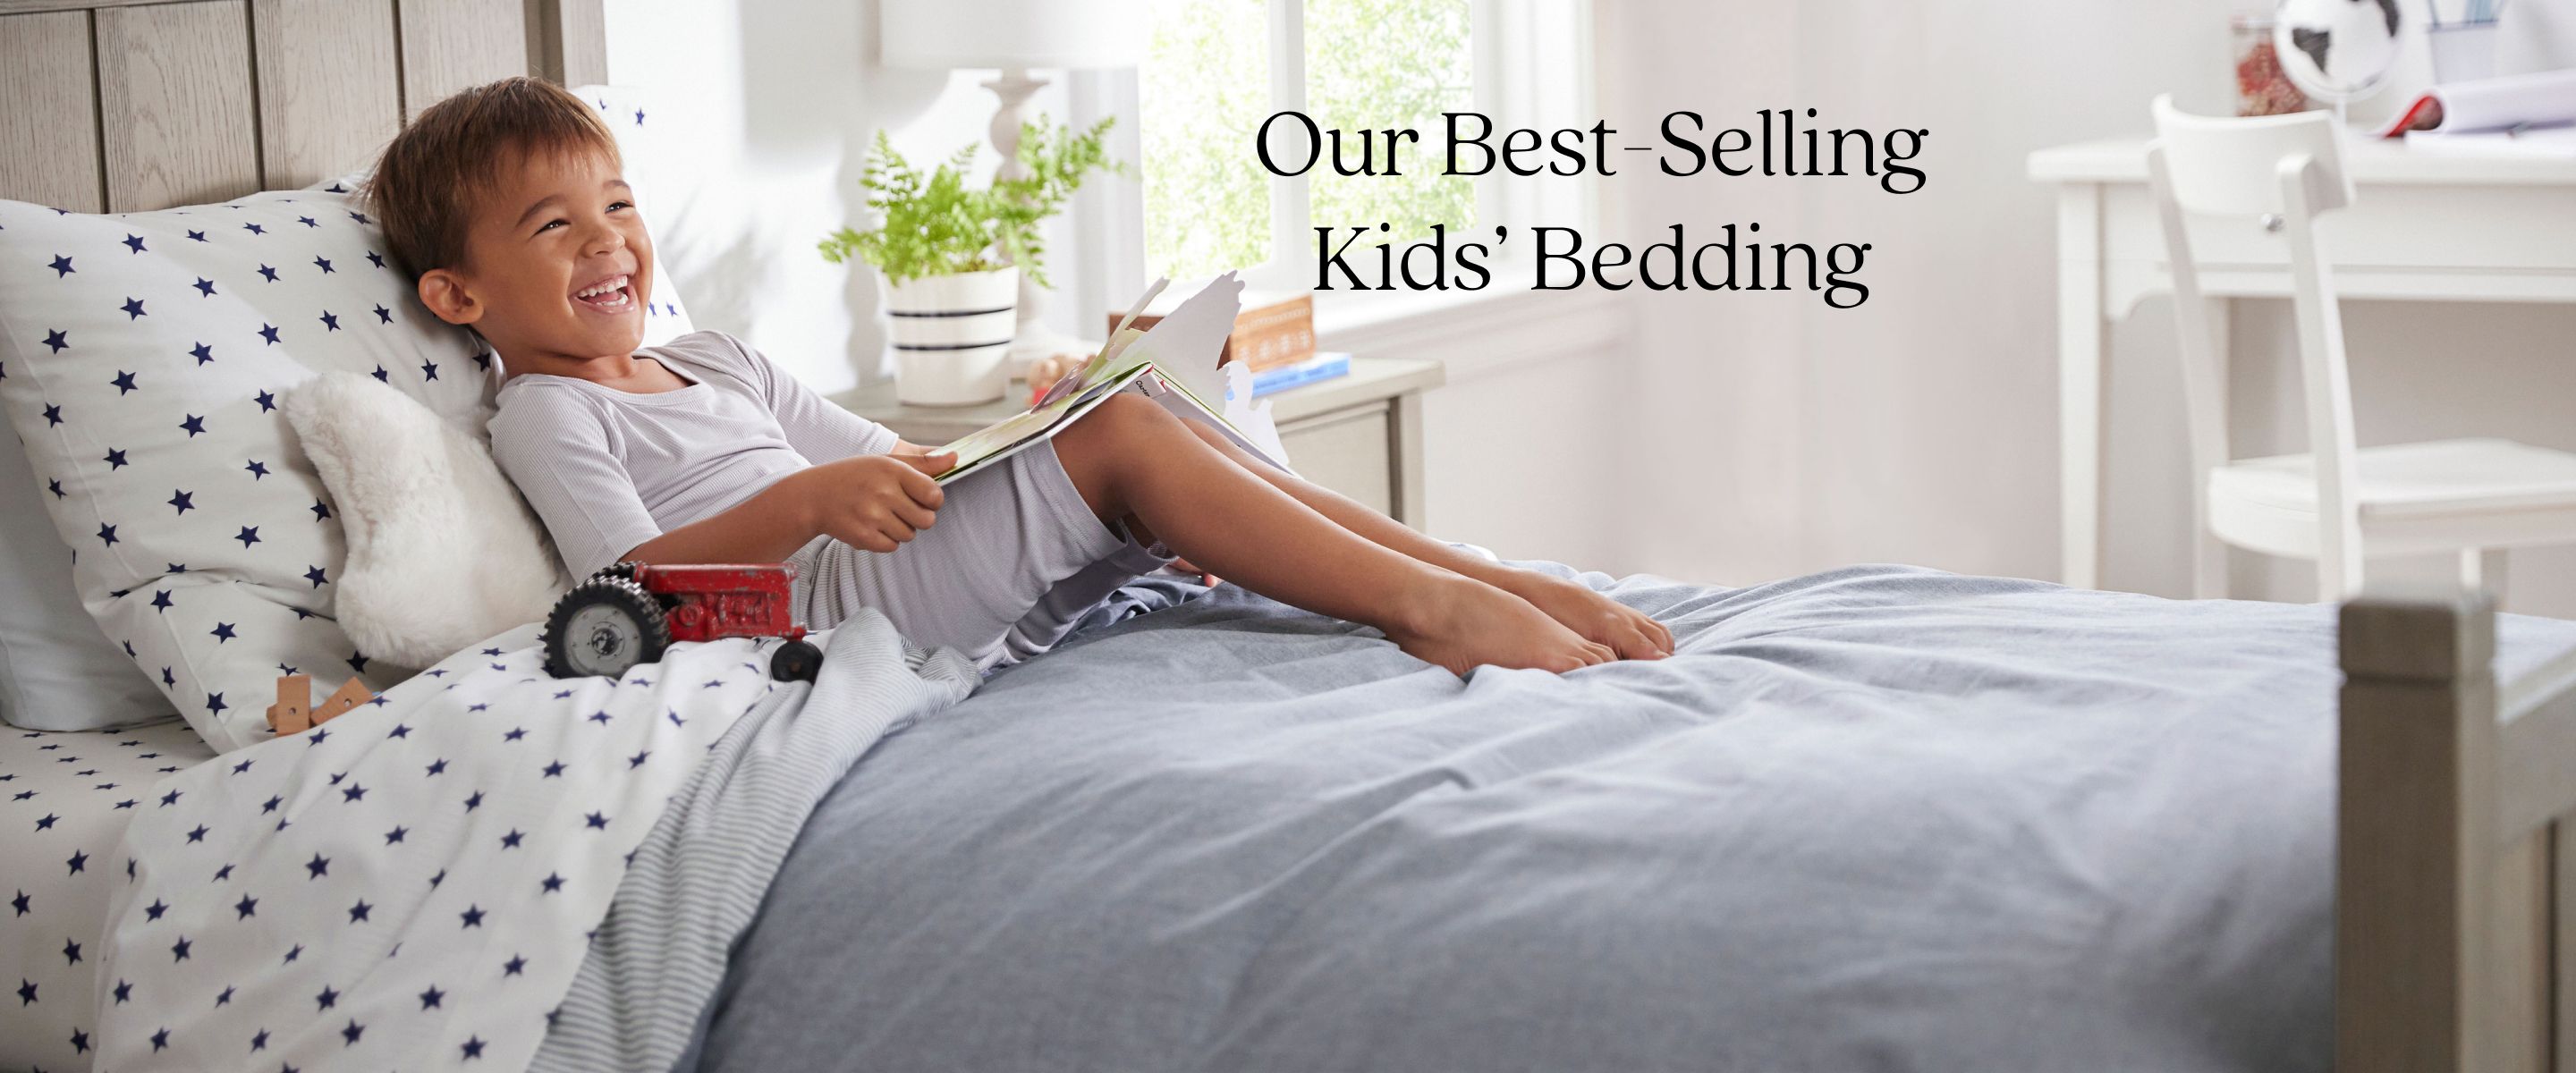 Our Best-Selling Kids Bedding